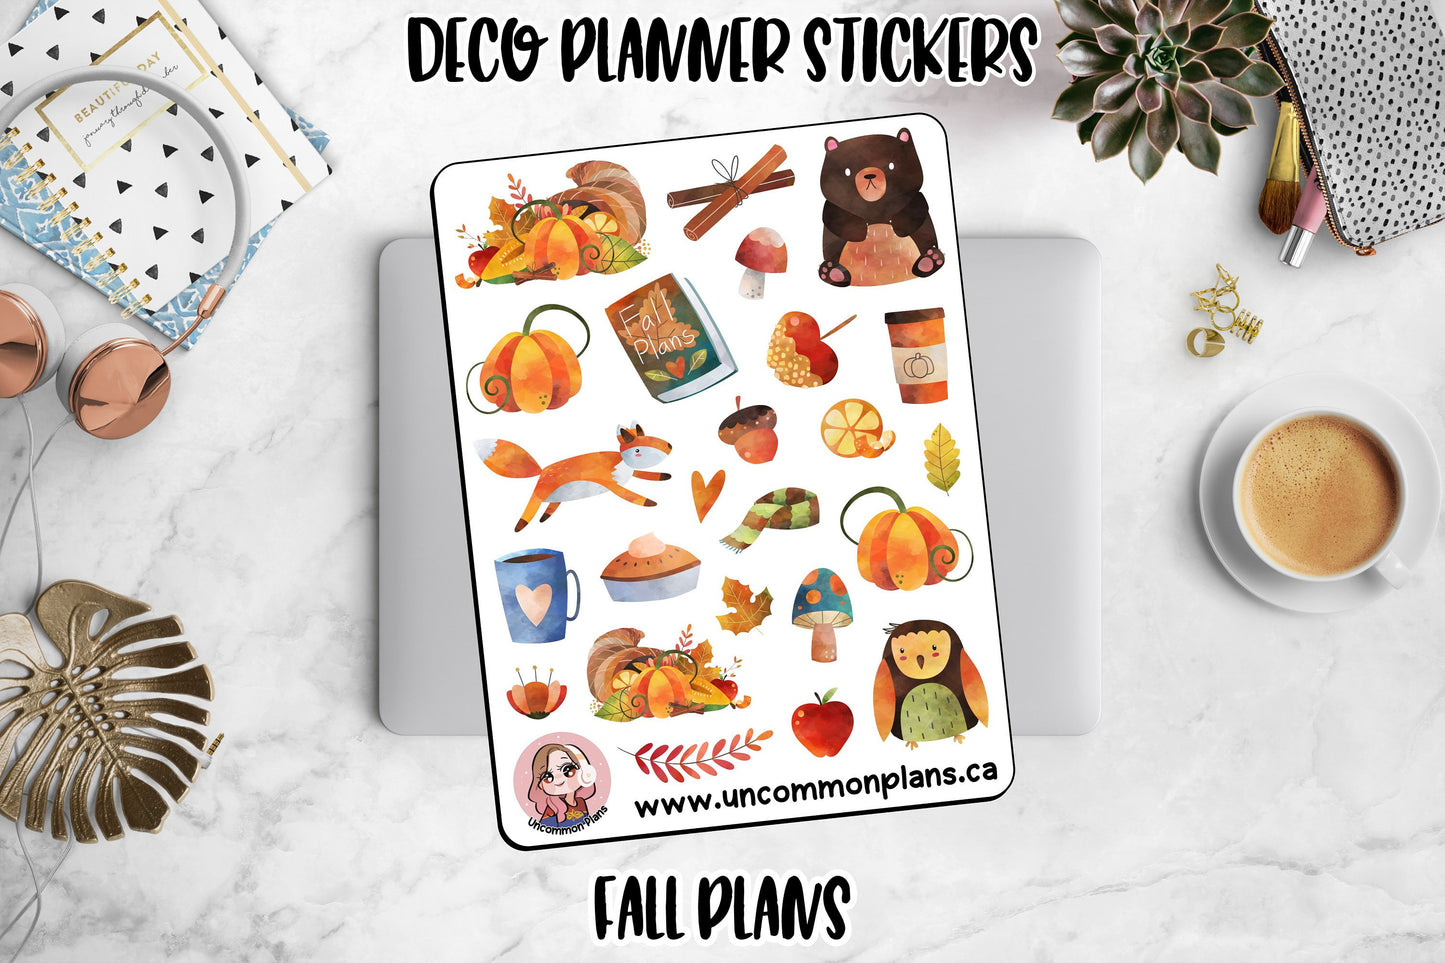 Fall Plans Deco Planner Stickers Sheet